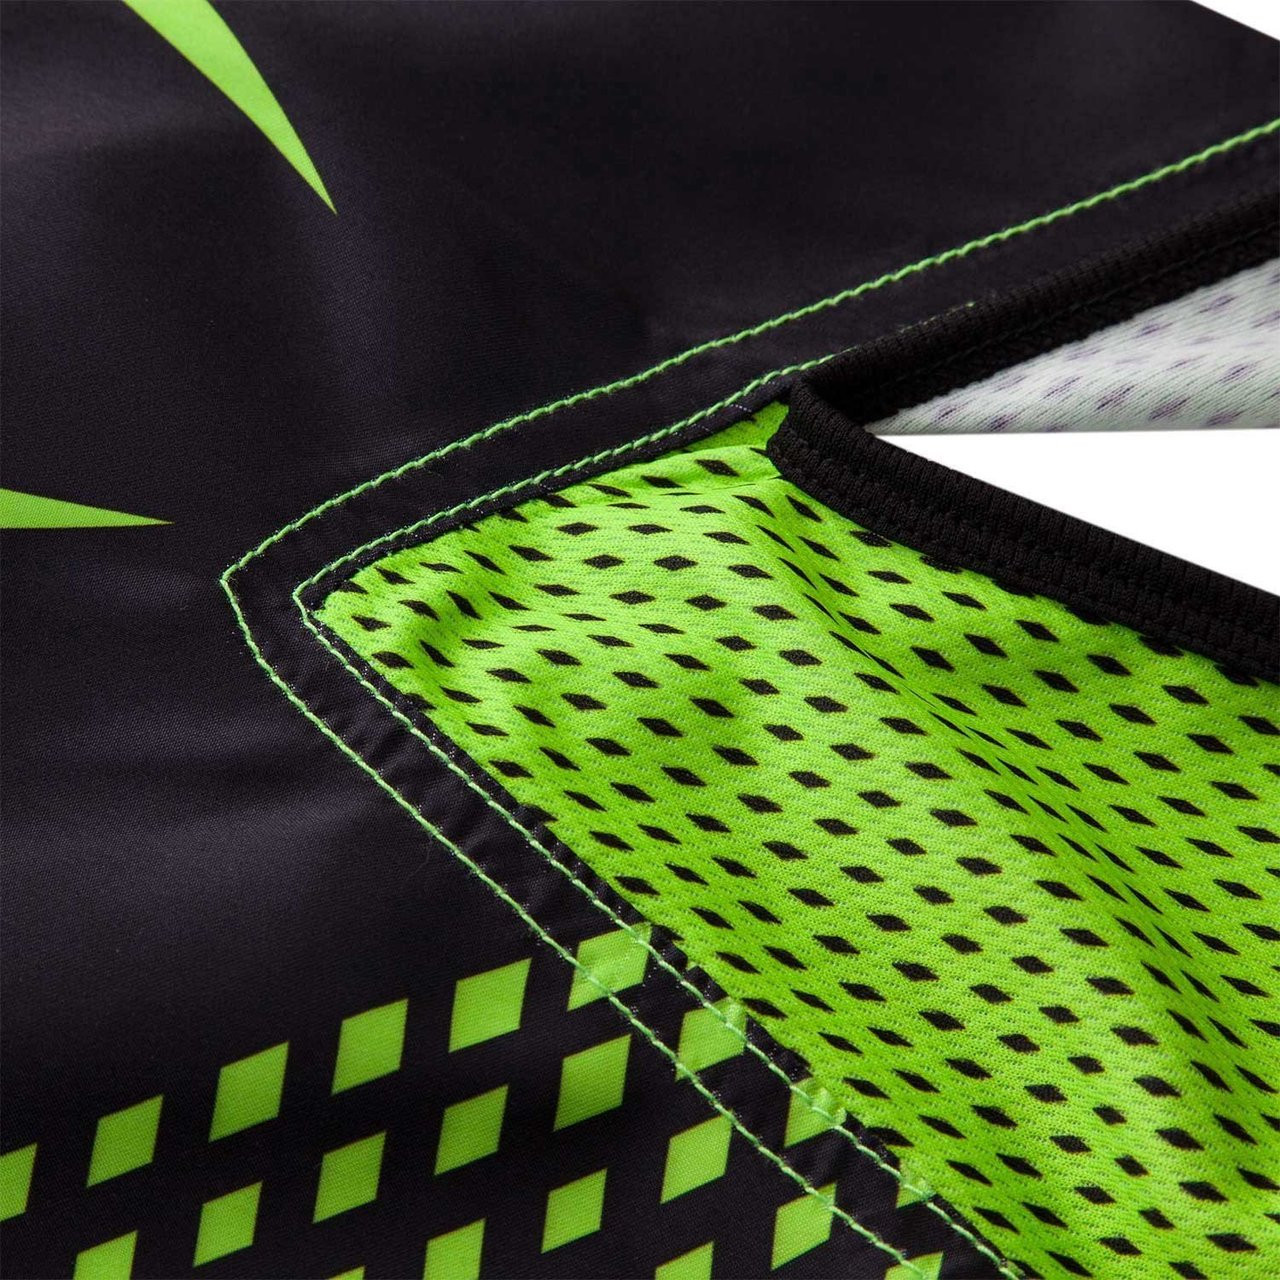 side panel of the Venum Hurricane Fight Shorts now available at www.thejiujitsushop.com Bring black and green shorts to take on the world. 

Enjoy Free Shipping from The Jiu Jitsu Shop today!